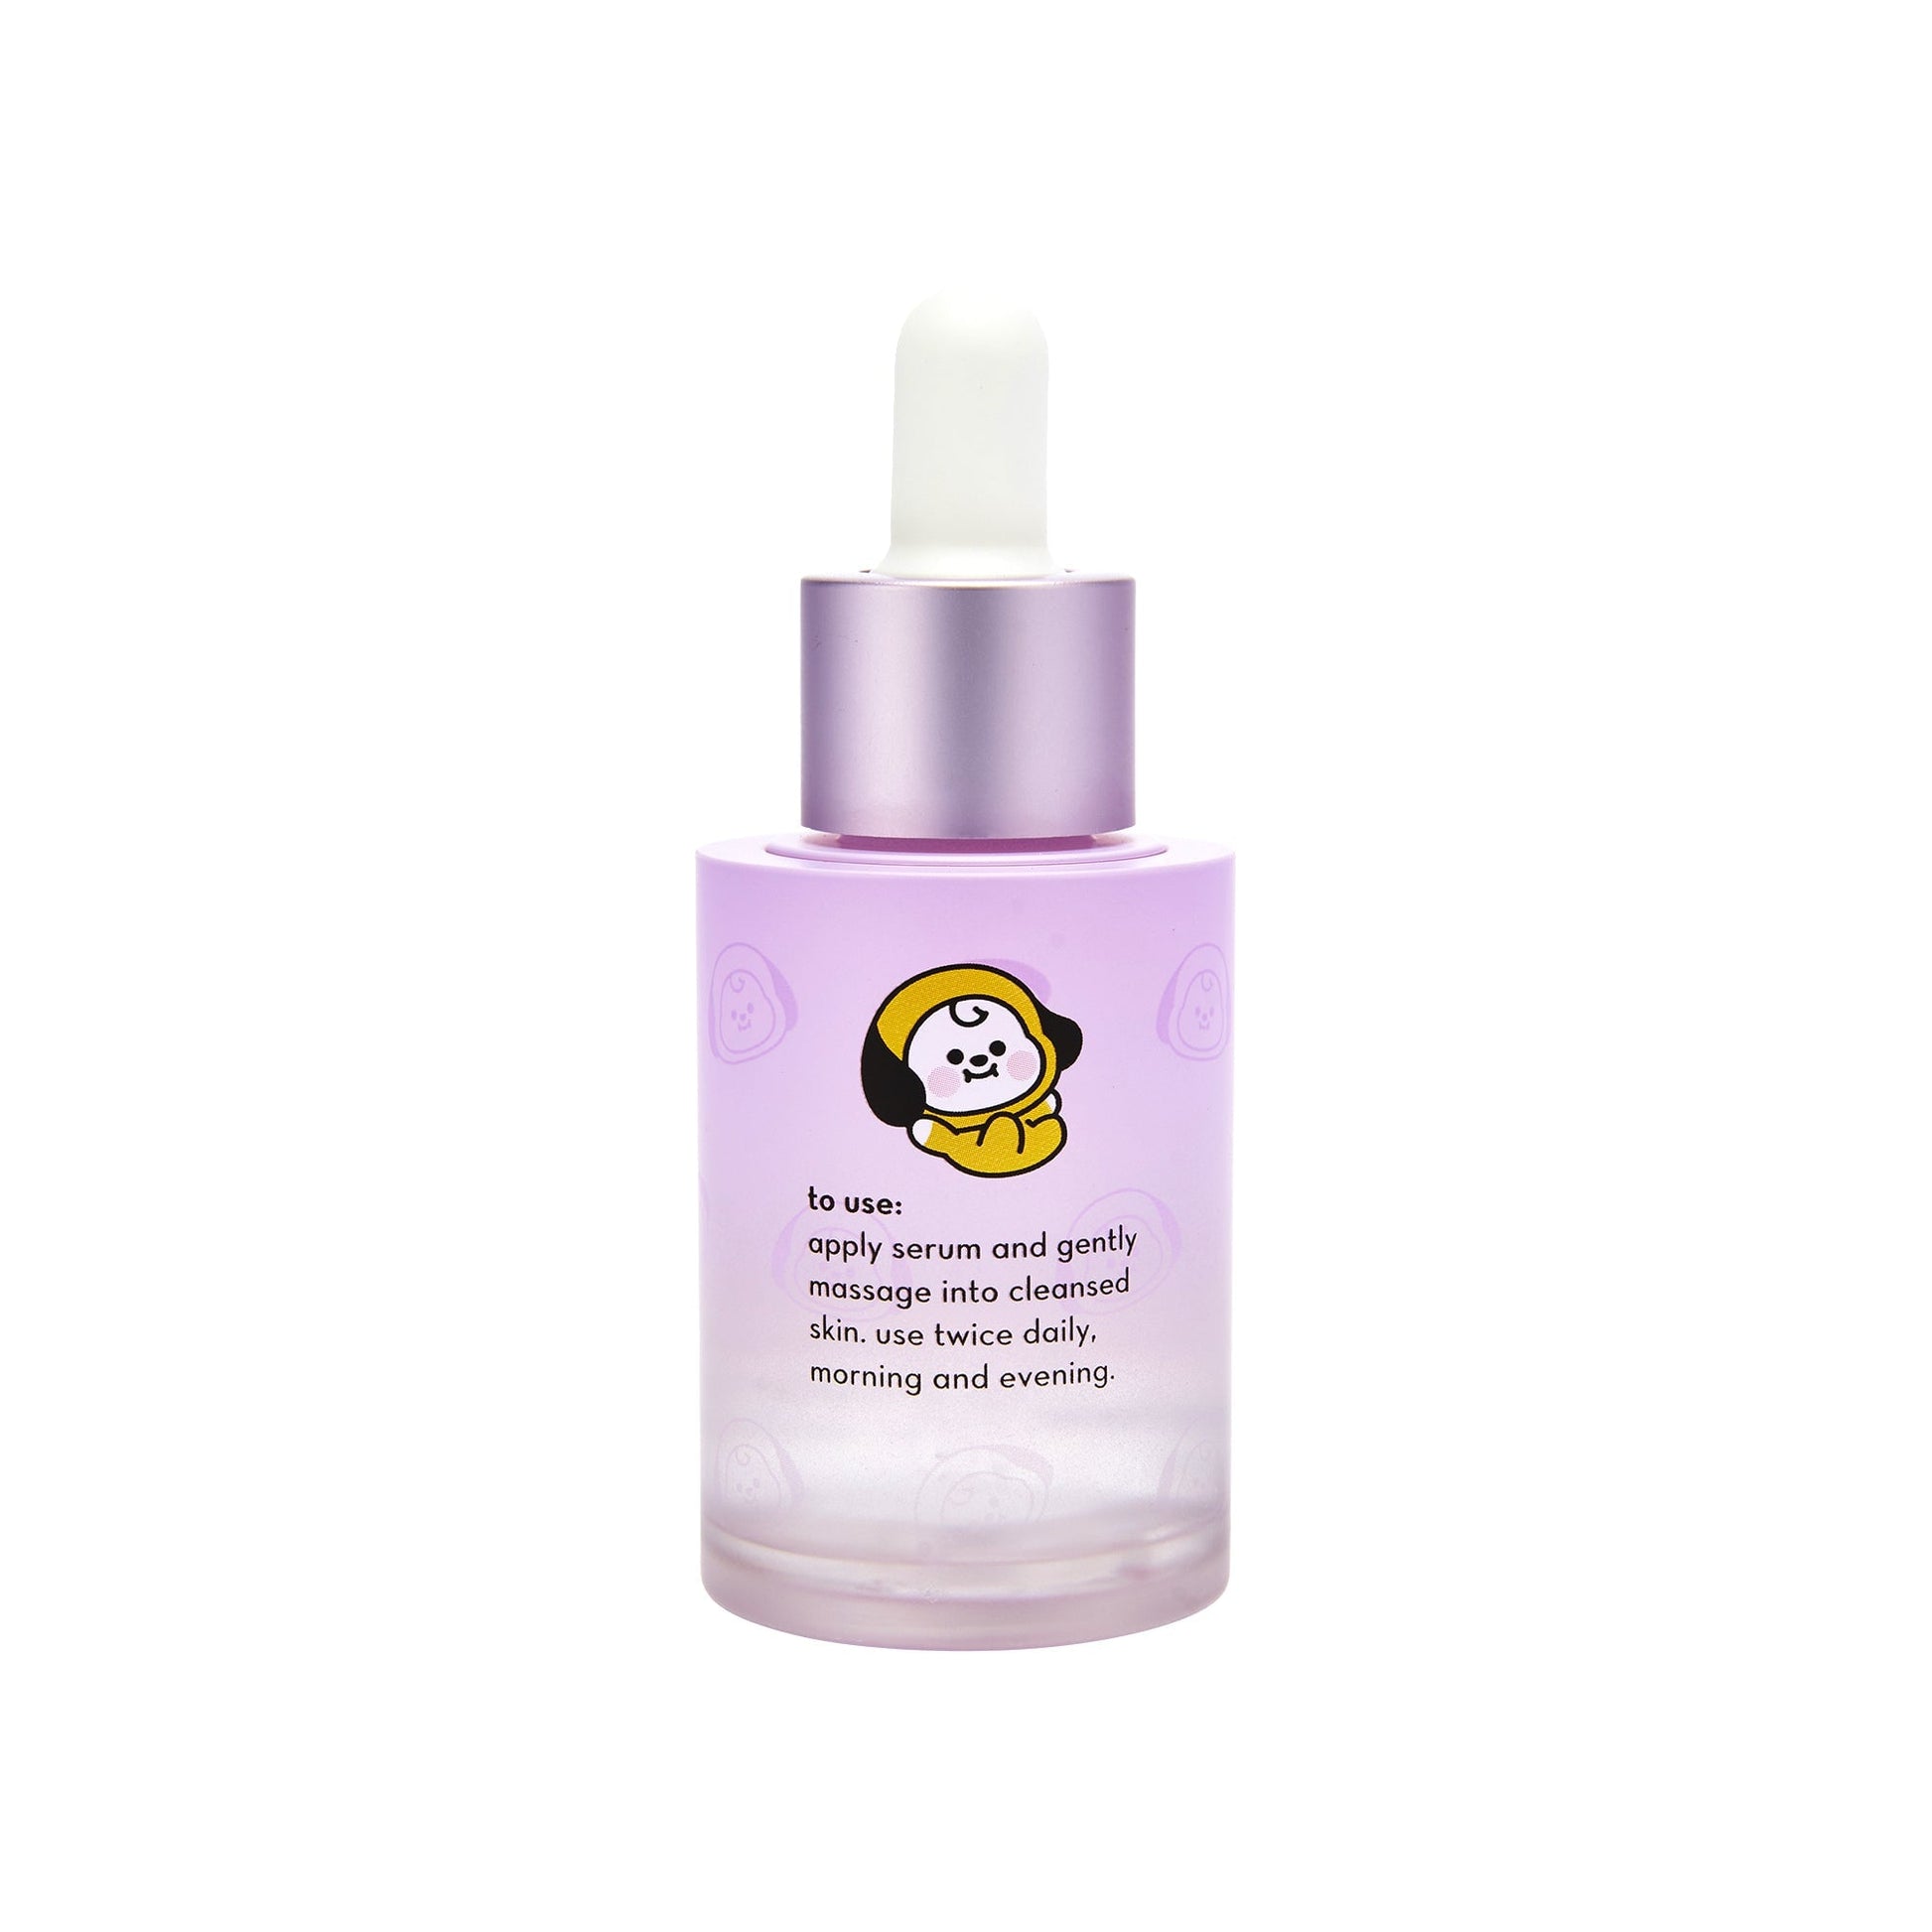 CHIMMY Clear Glow Essence Serum - Klean Beauty™️ Skin Care The Crème Shop x BT21 BABY 